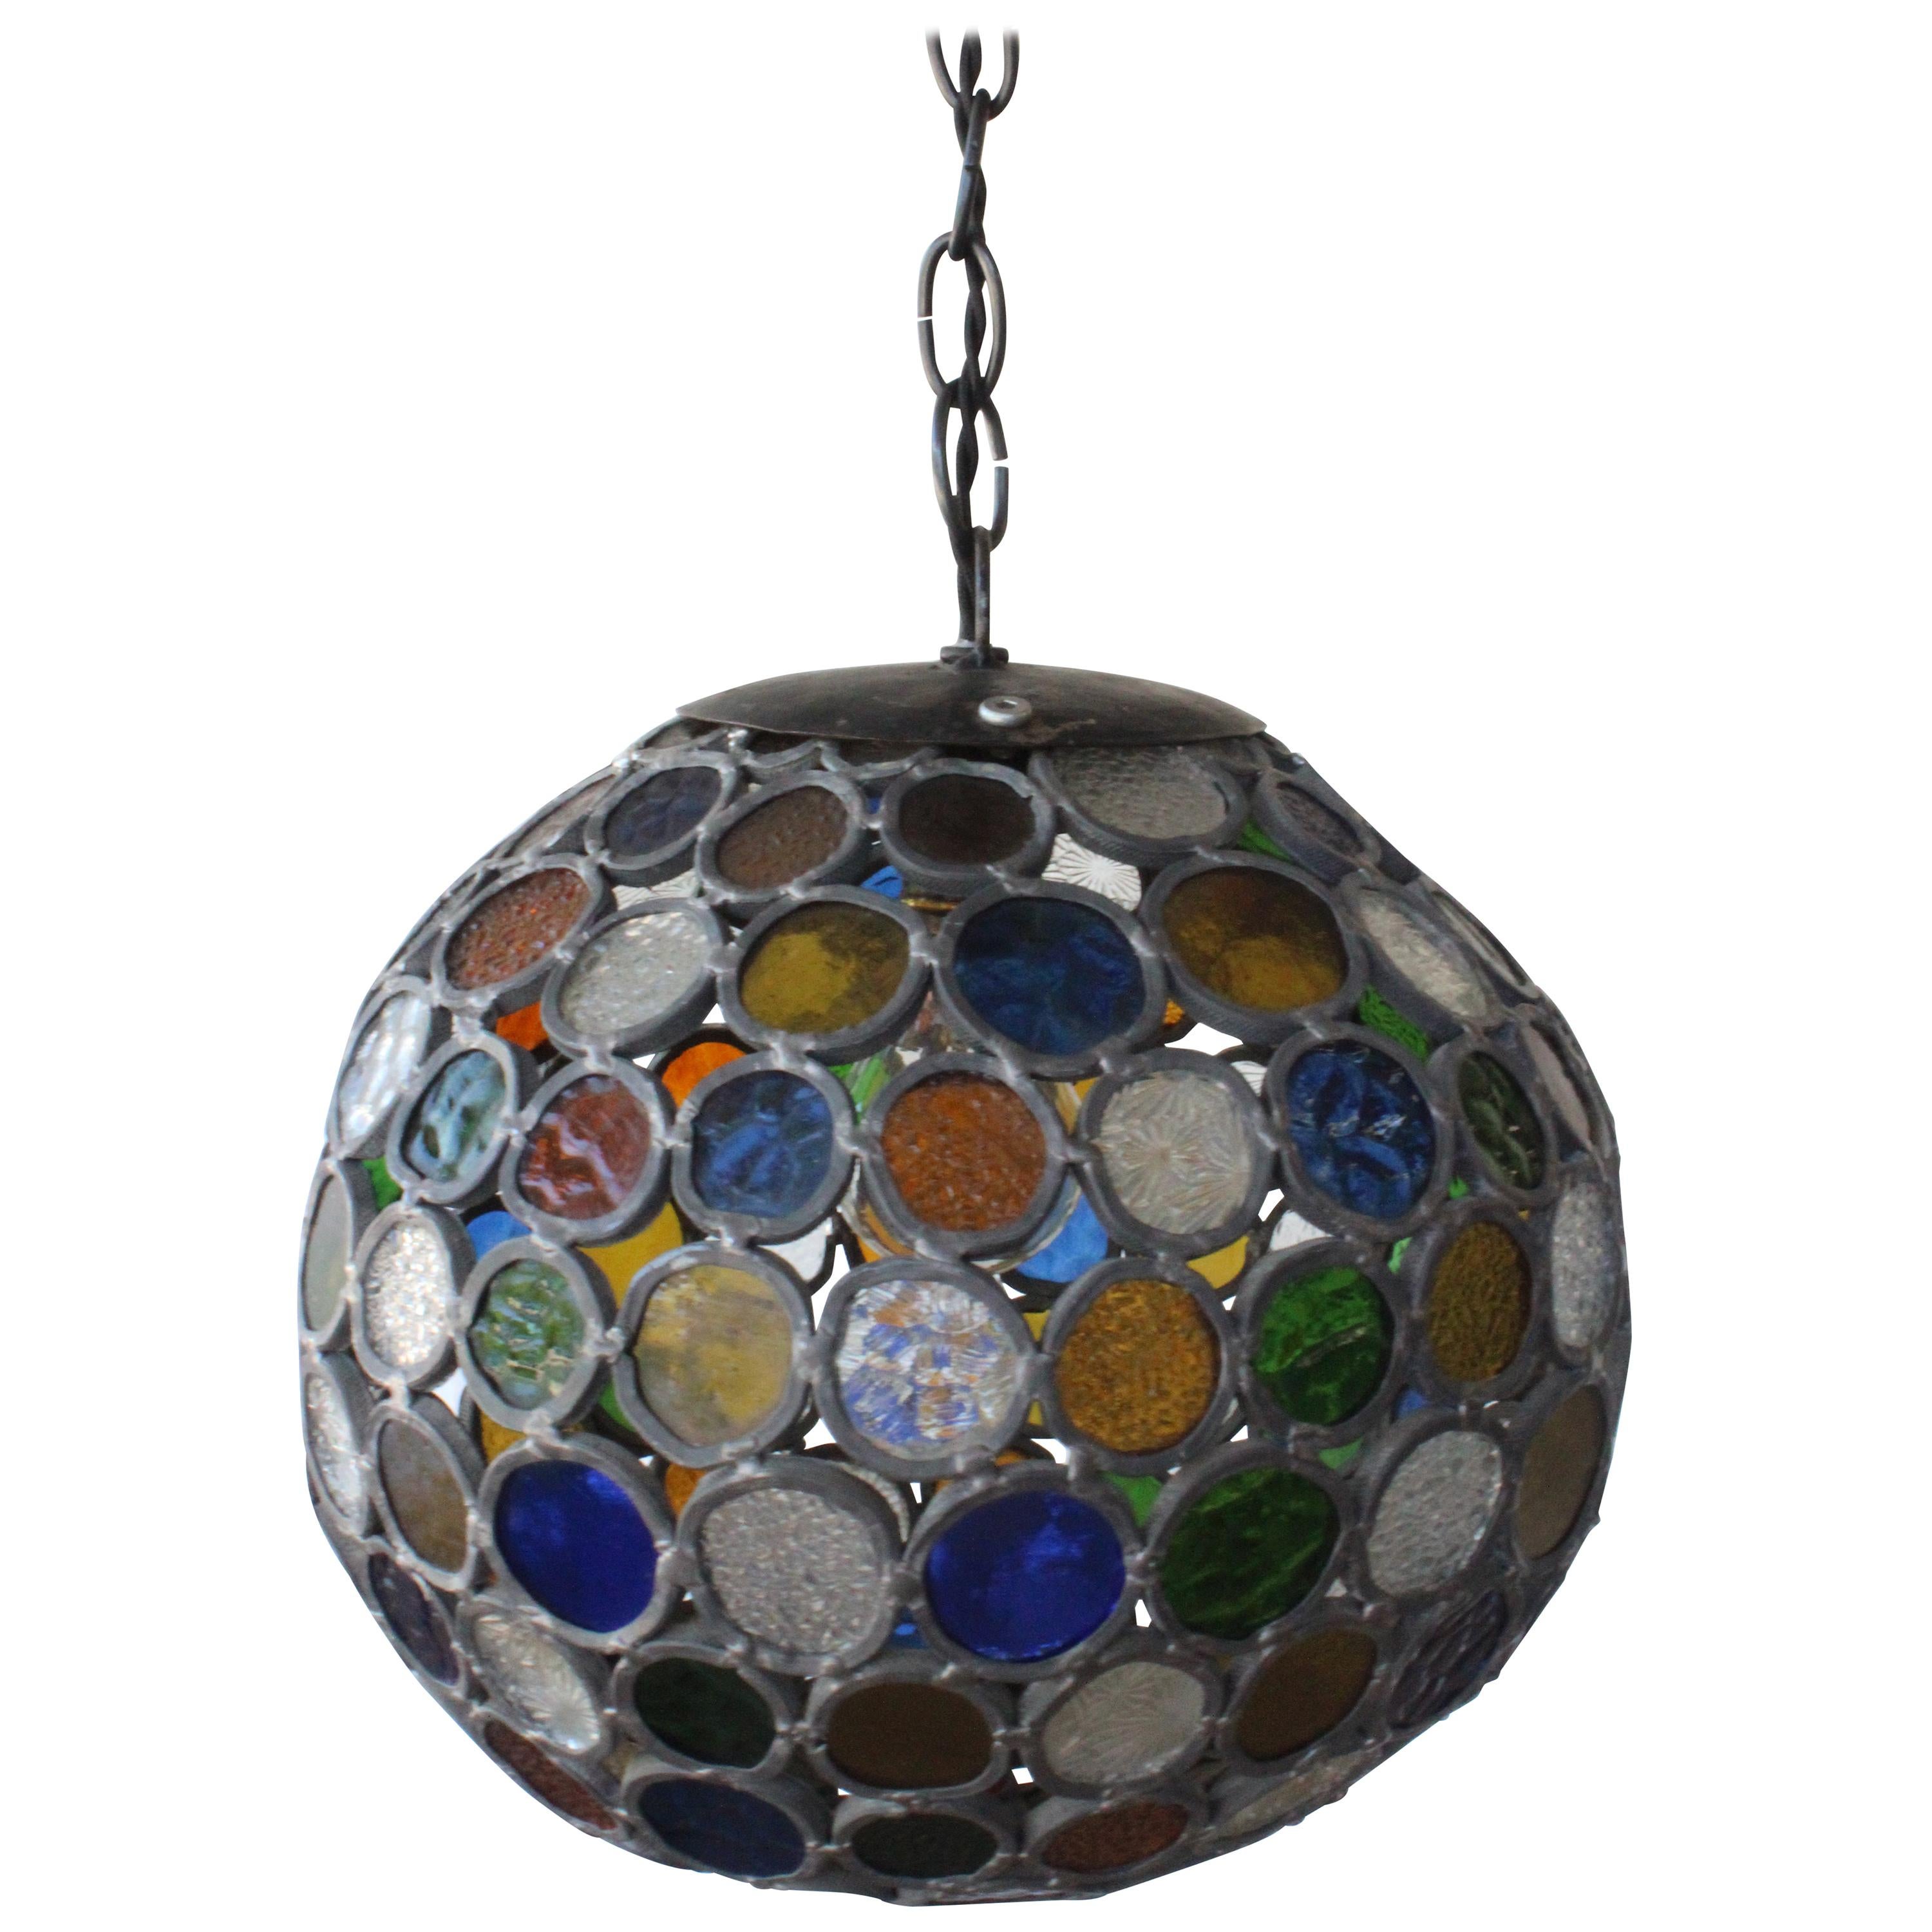 Antique Stained Glass Hanging Pendant Light, U.S.A, 1960s